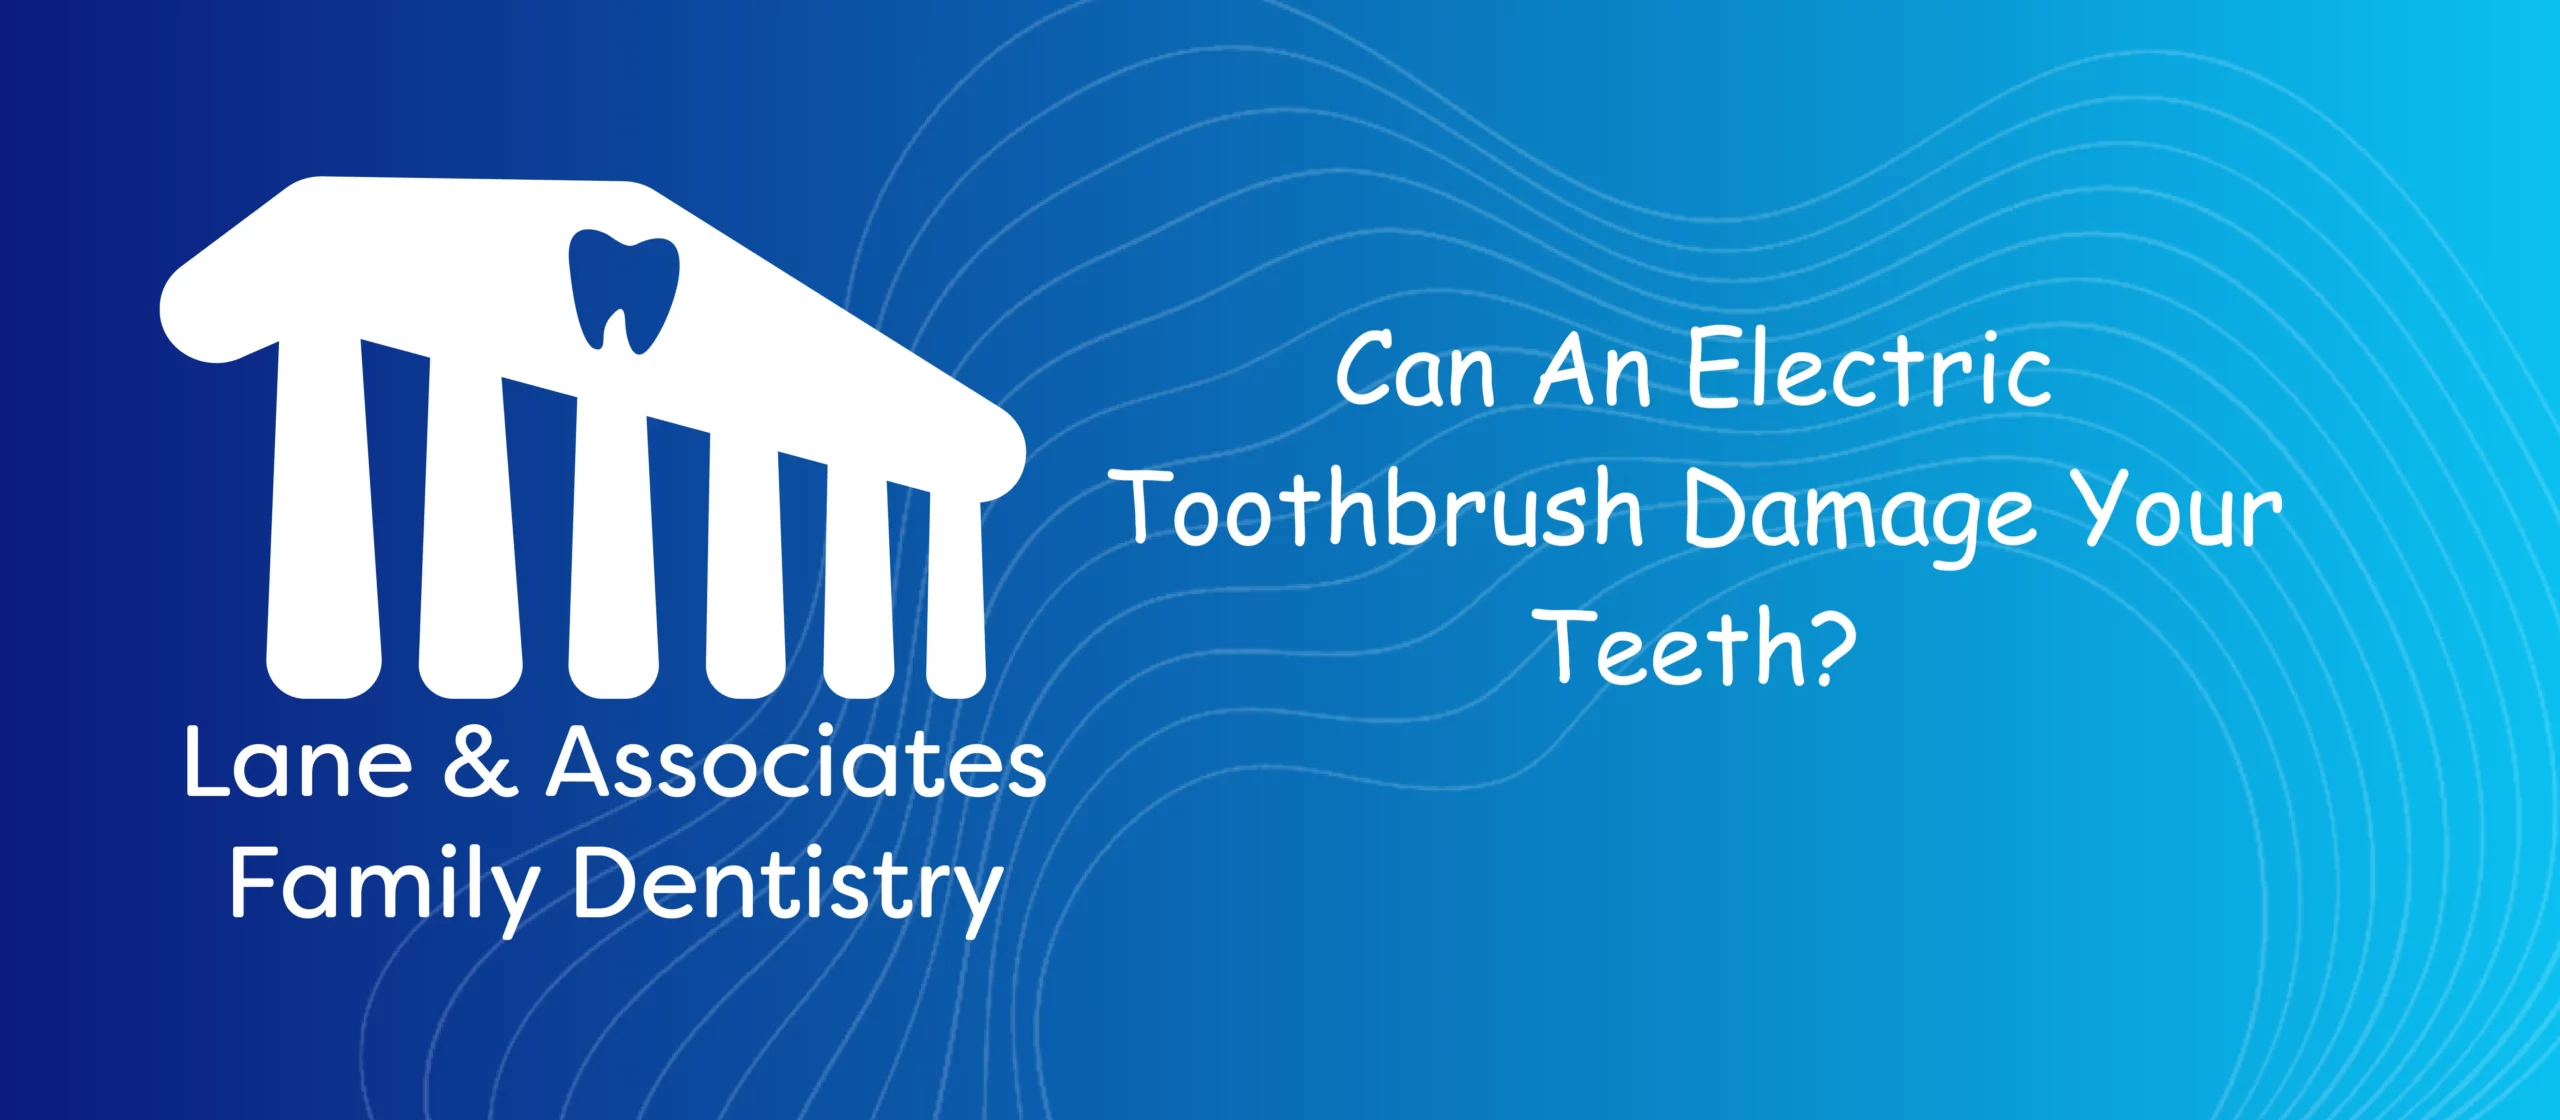 Can An Electric Toothbrush Damage Your Teeth?